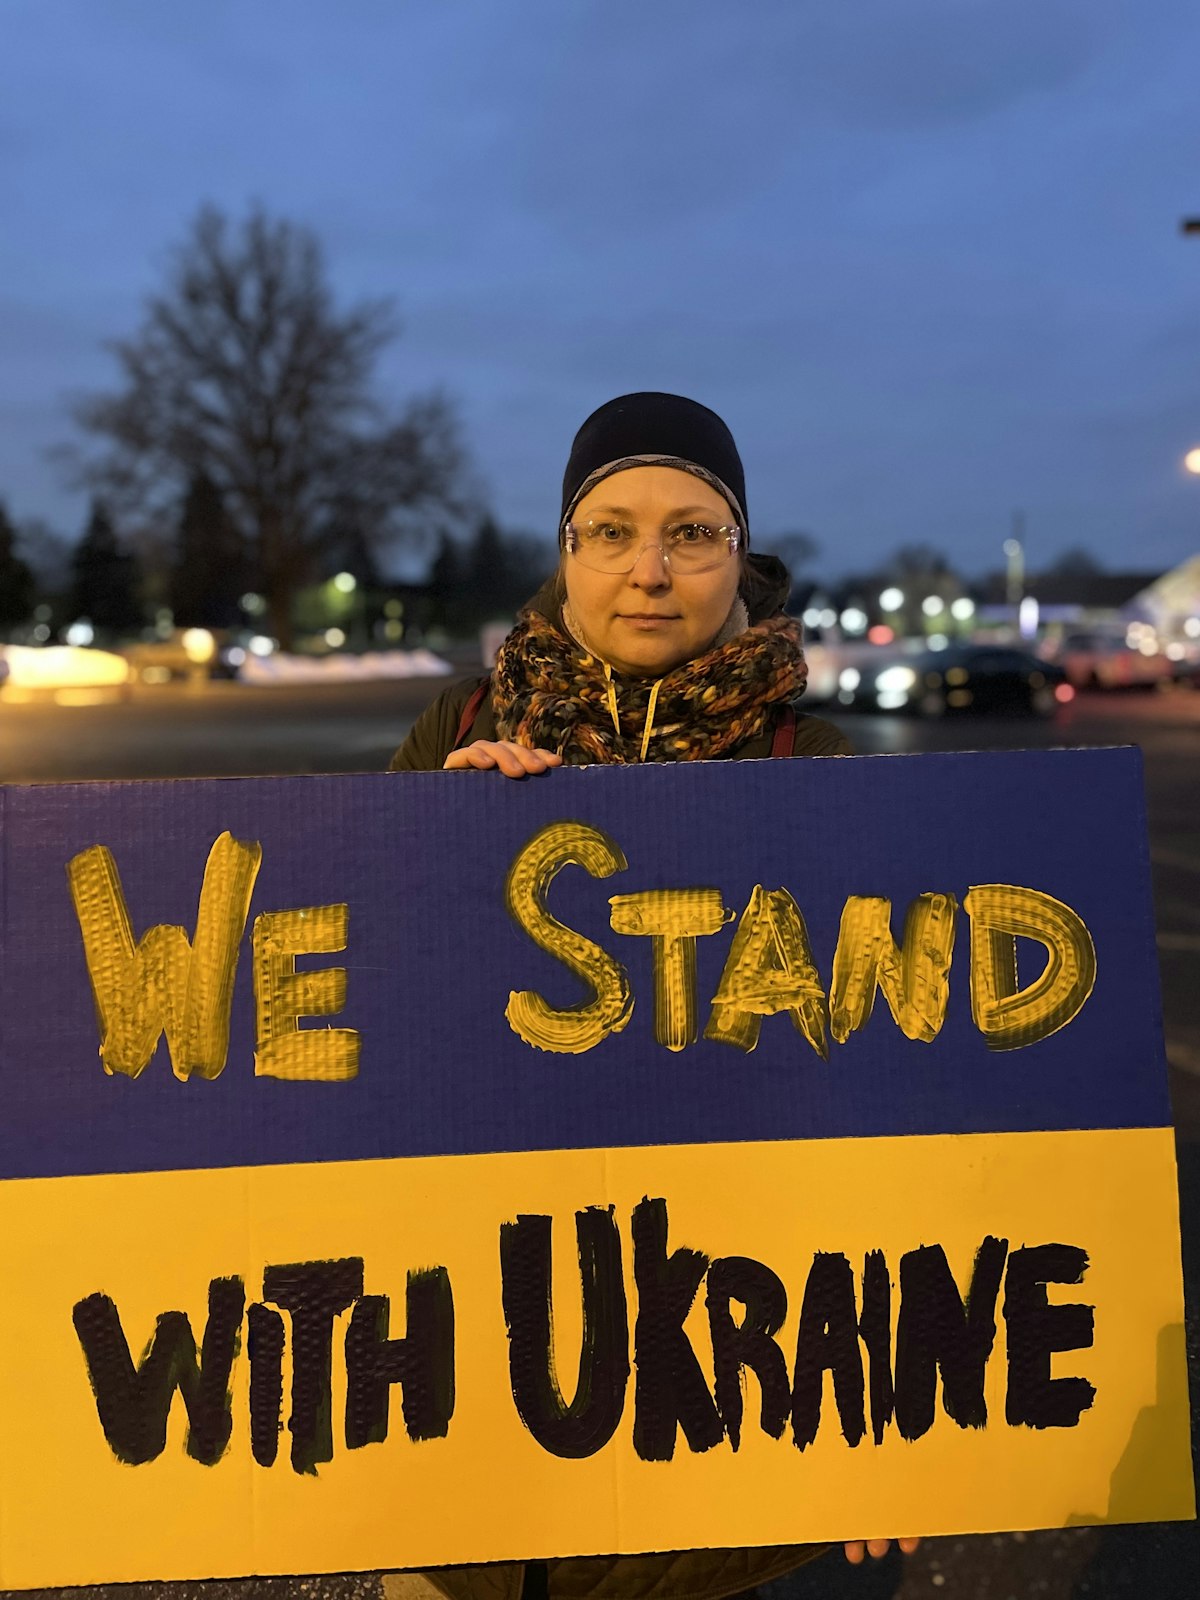 Russian citizen Olga Grushko stood in support of Ukrainians at the rally. She wants Ukrainians to know that many Russians are against the invasion, but many cannot speak up without fear of reprisal in Russia. (Gabriella Patti | Detroit Catholic)